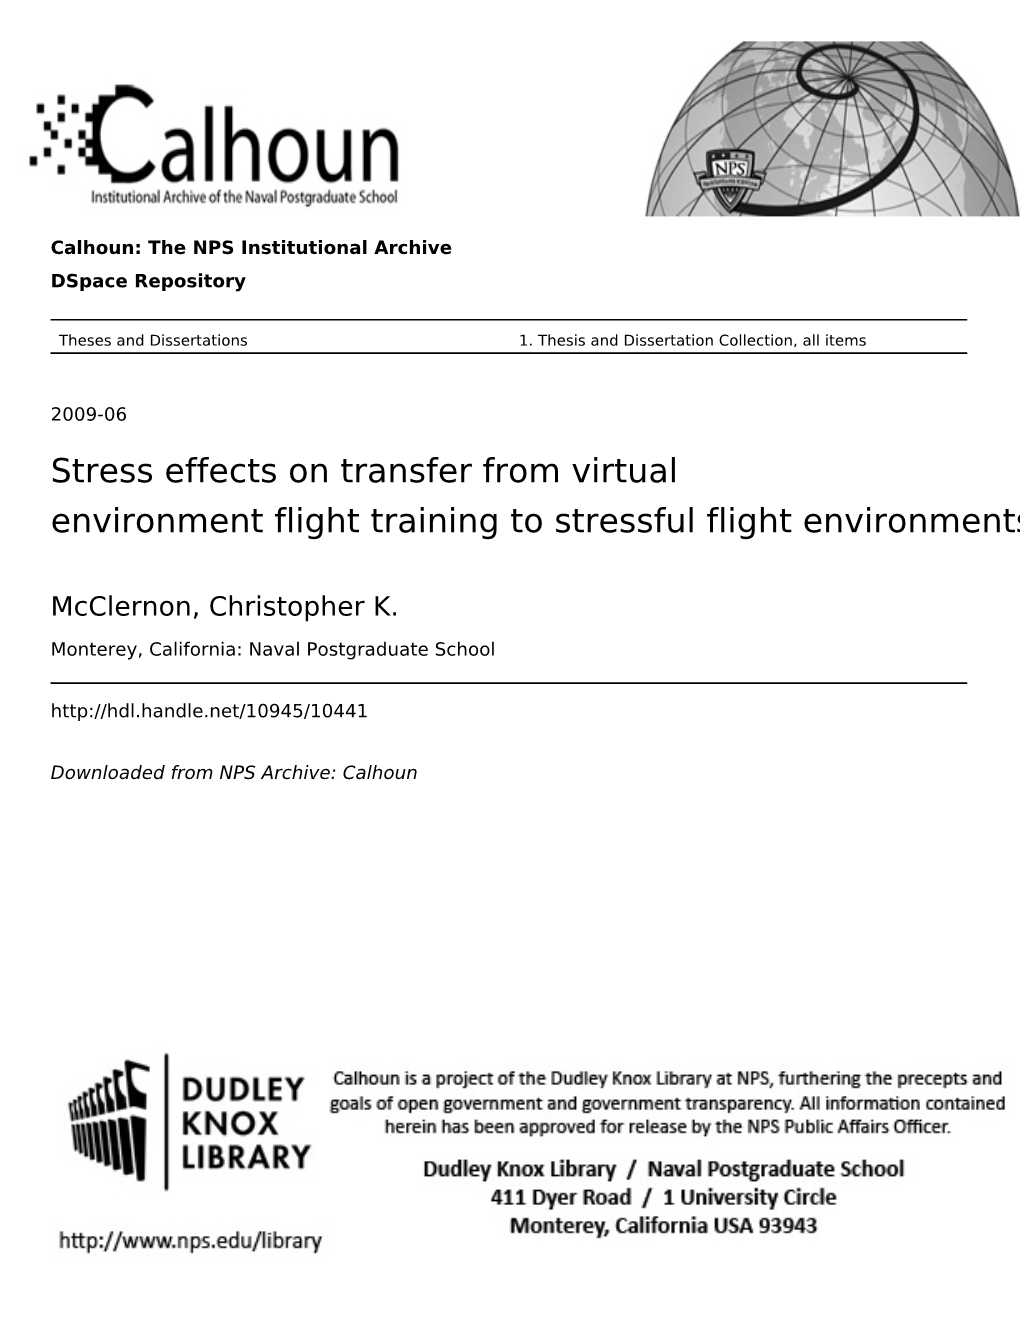 Stress Effects on Transfer from Virtual Environment Flight Training to Stressful Flight Environments